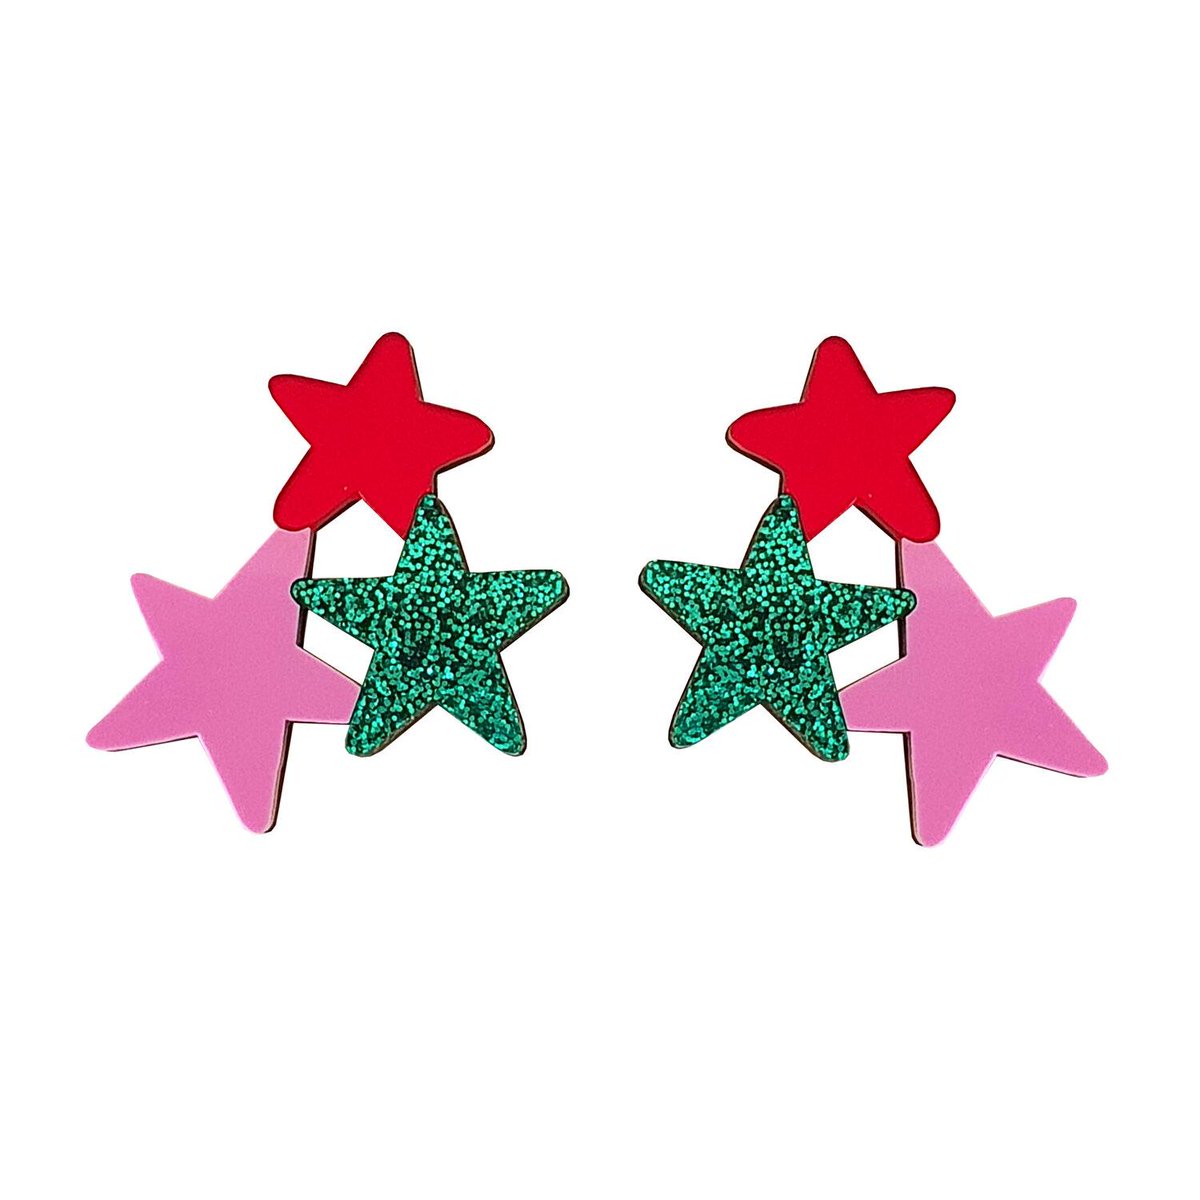 Happy Mother’s Day! Let’s celebrate the wonder women in our lives. That includes stepmums, godmothers, doting single dads & every other motherly figure. We love you! ♥️ elementjewellery.com #happymothersday #mum #celebrate #star #glitter #earrings #shoplocal #HebdenBridge